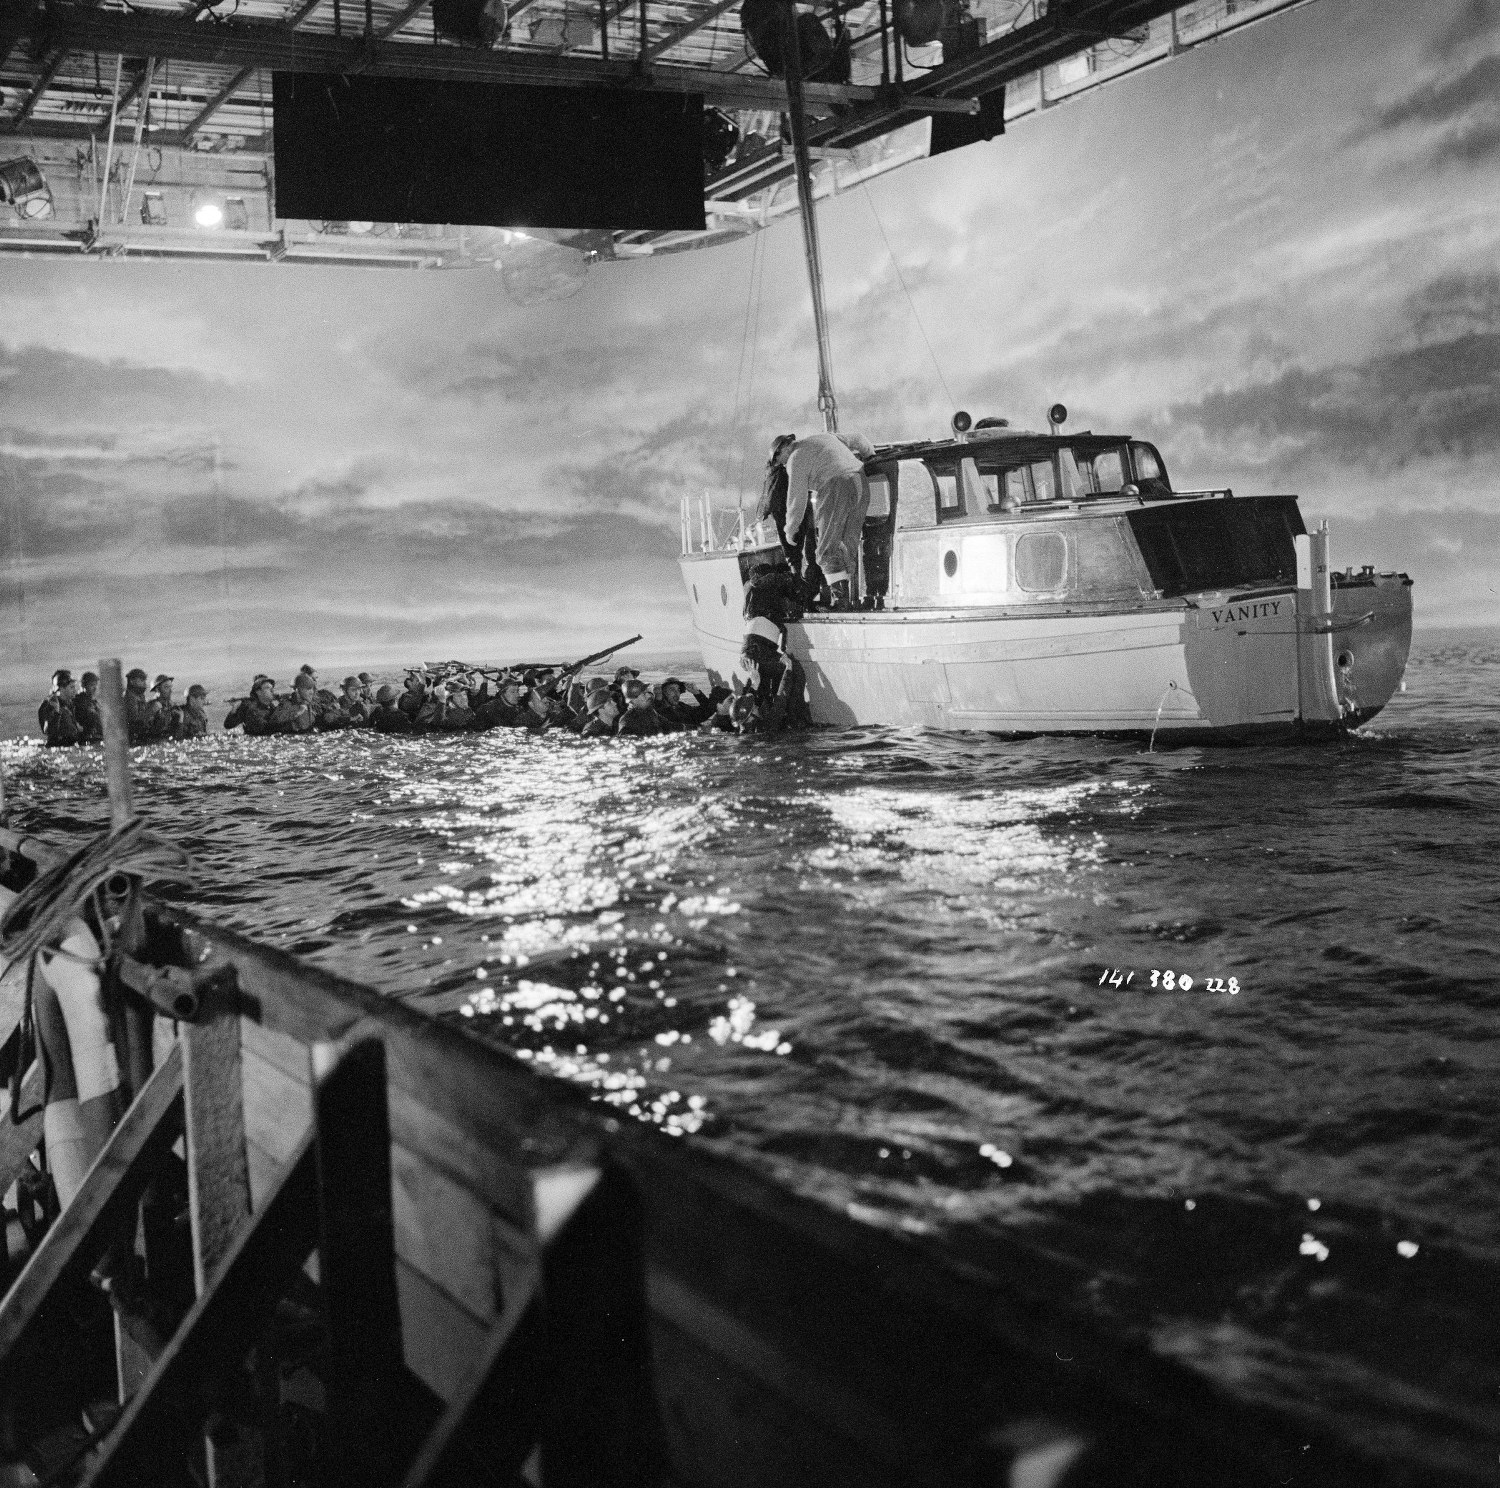 dunkirk-behind-the-scenes-image-01-confusions-and-connections